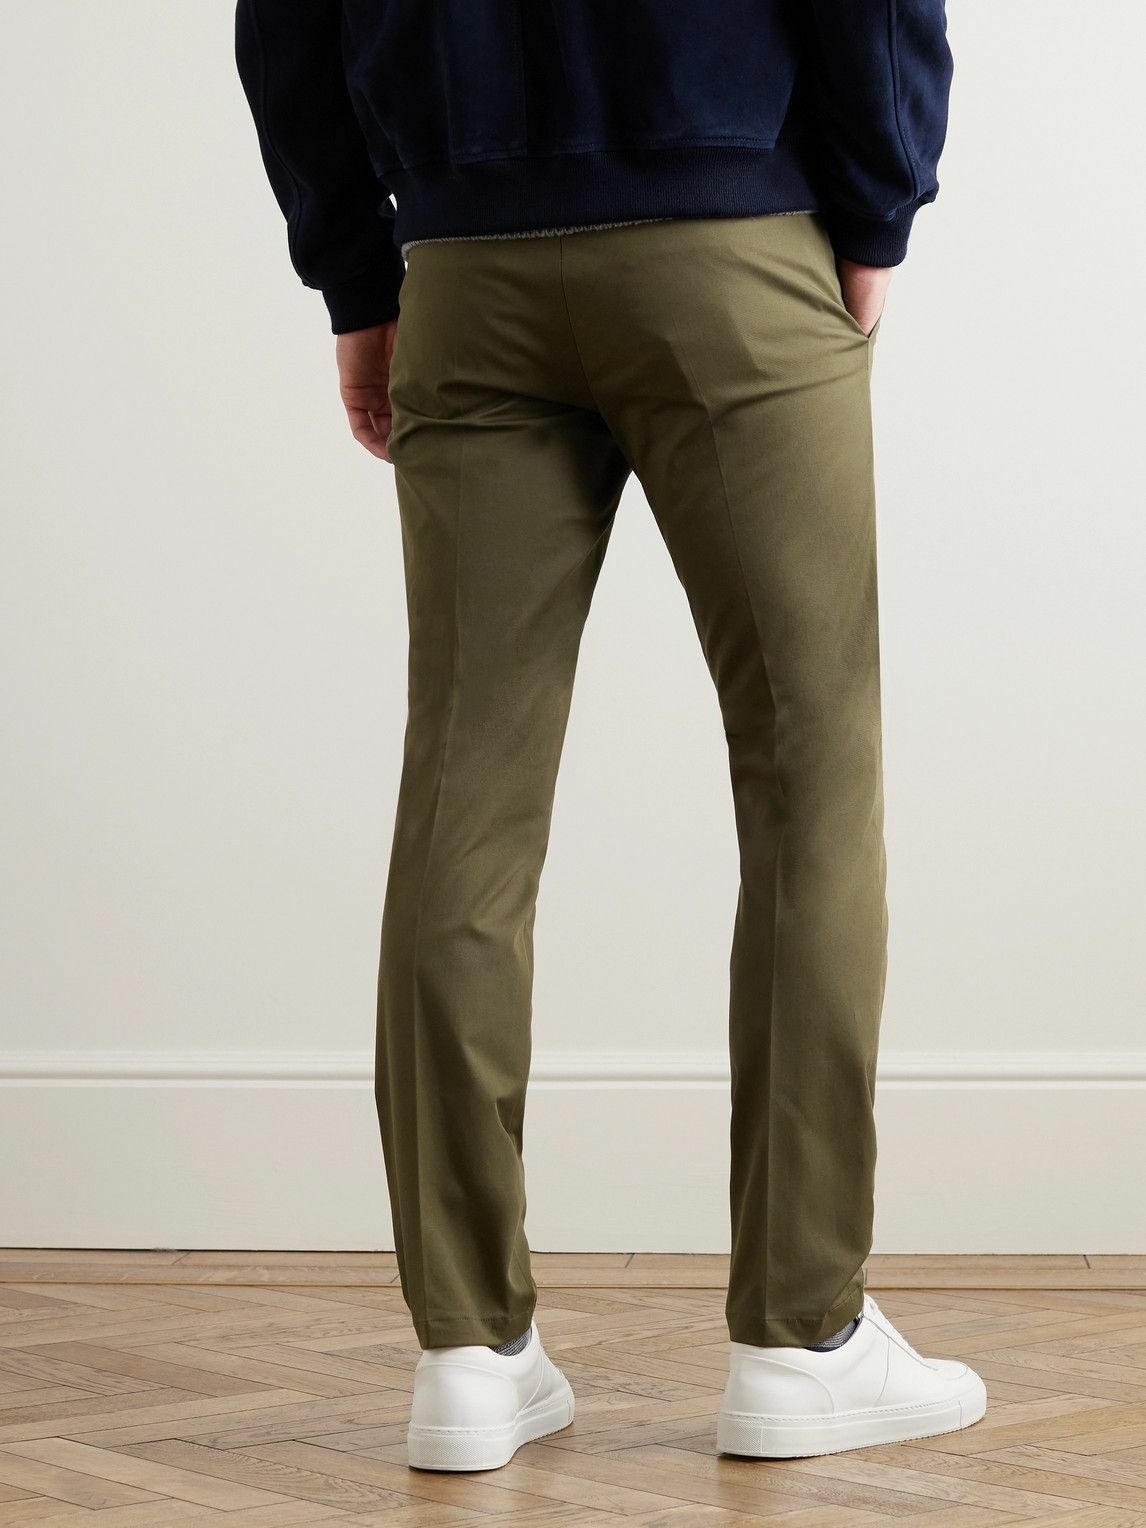 WELCOME RIVERS | Baggy Cotton Twill Pants